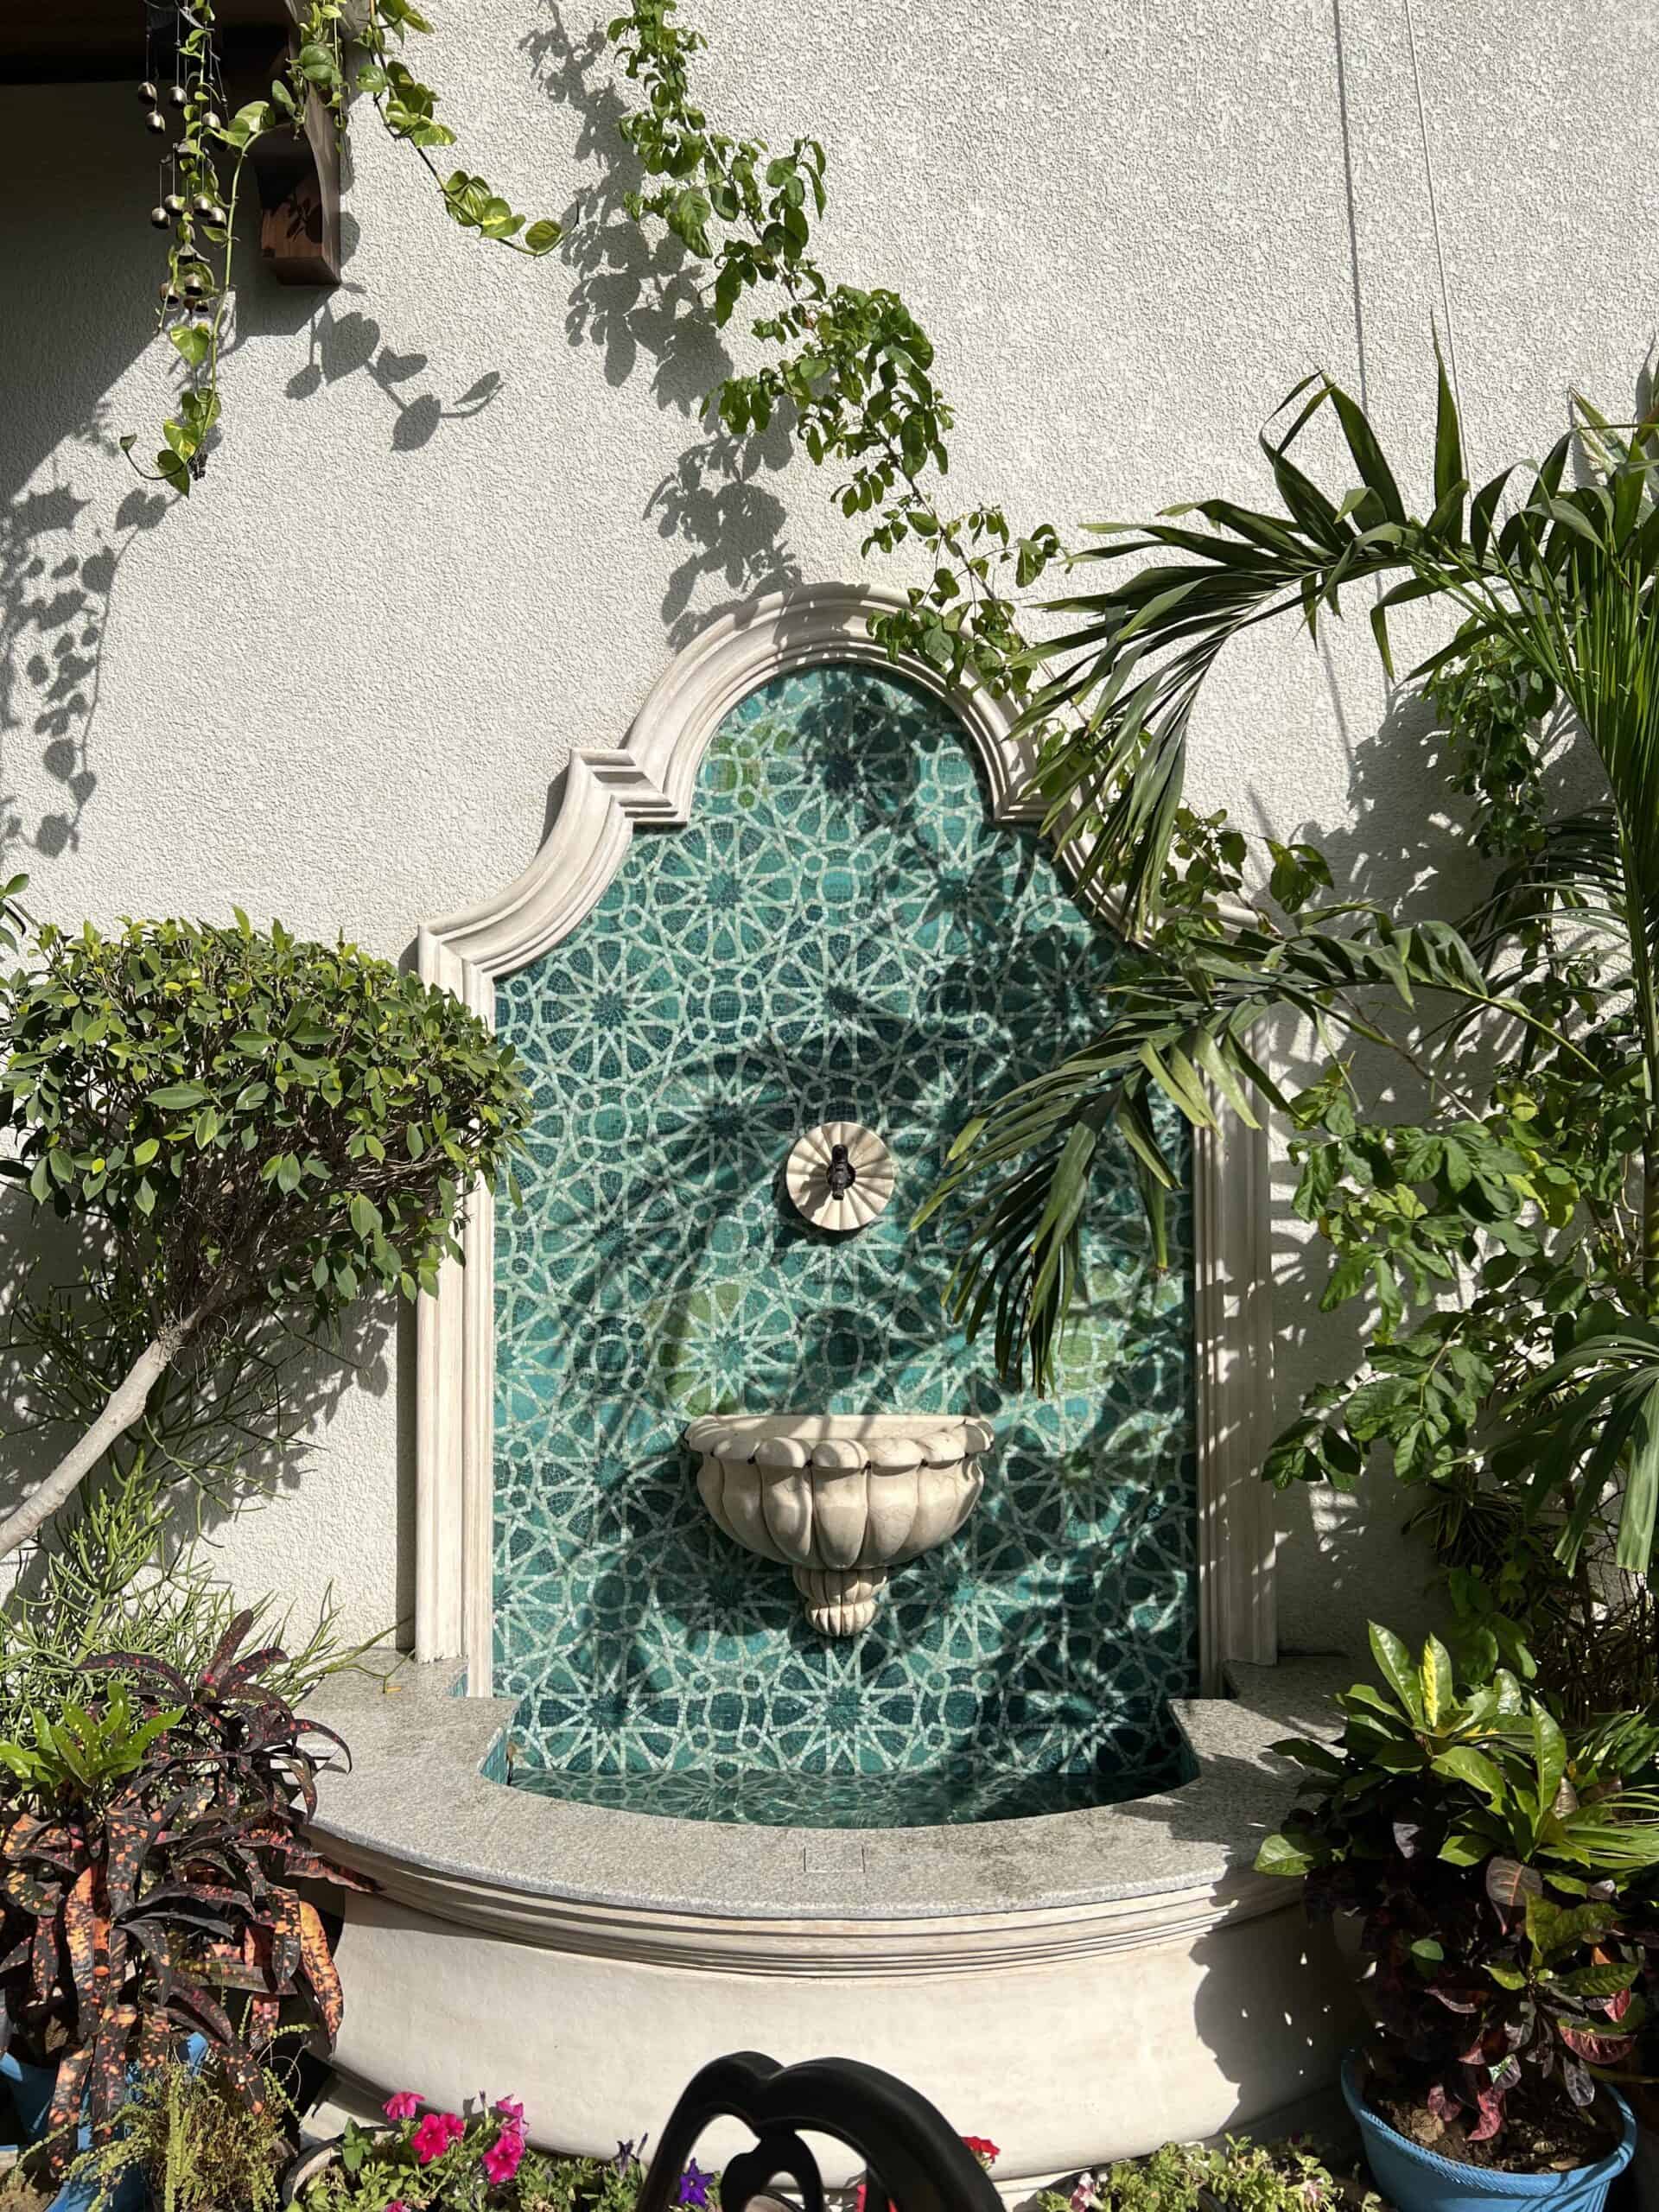 modern ethnic mosaic which displays a Moroccan design made with turquoise mosaic tiles